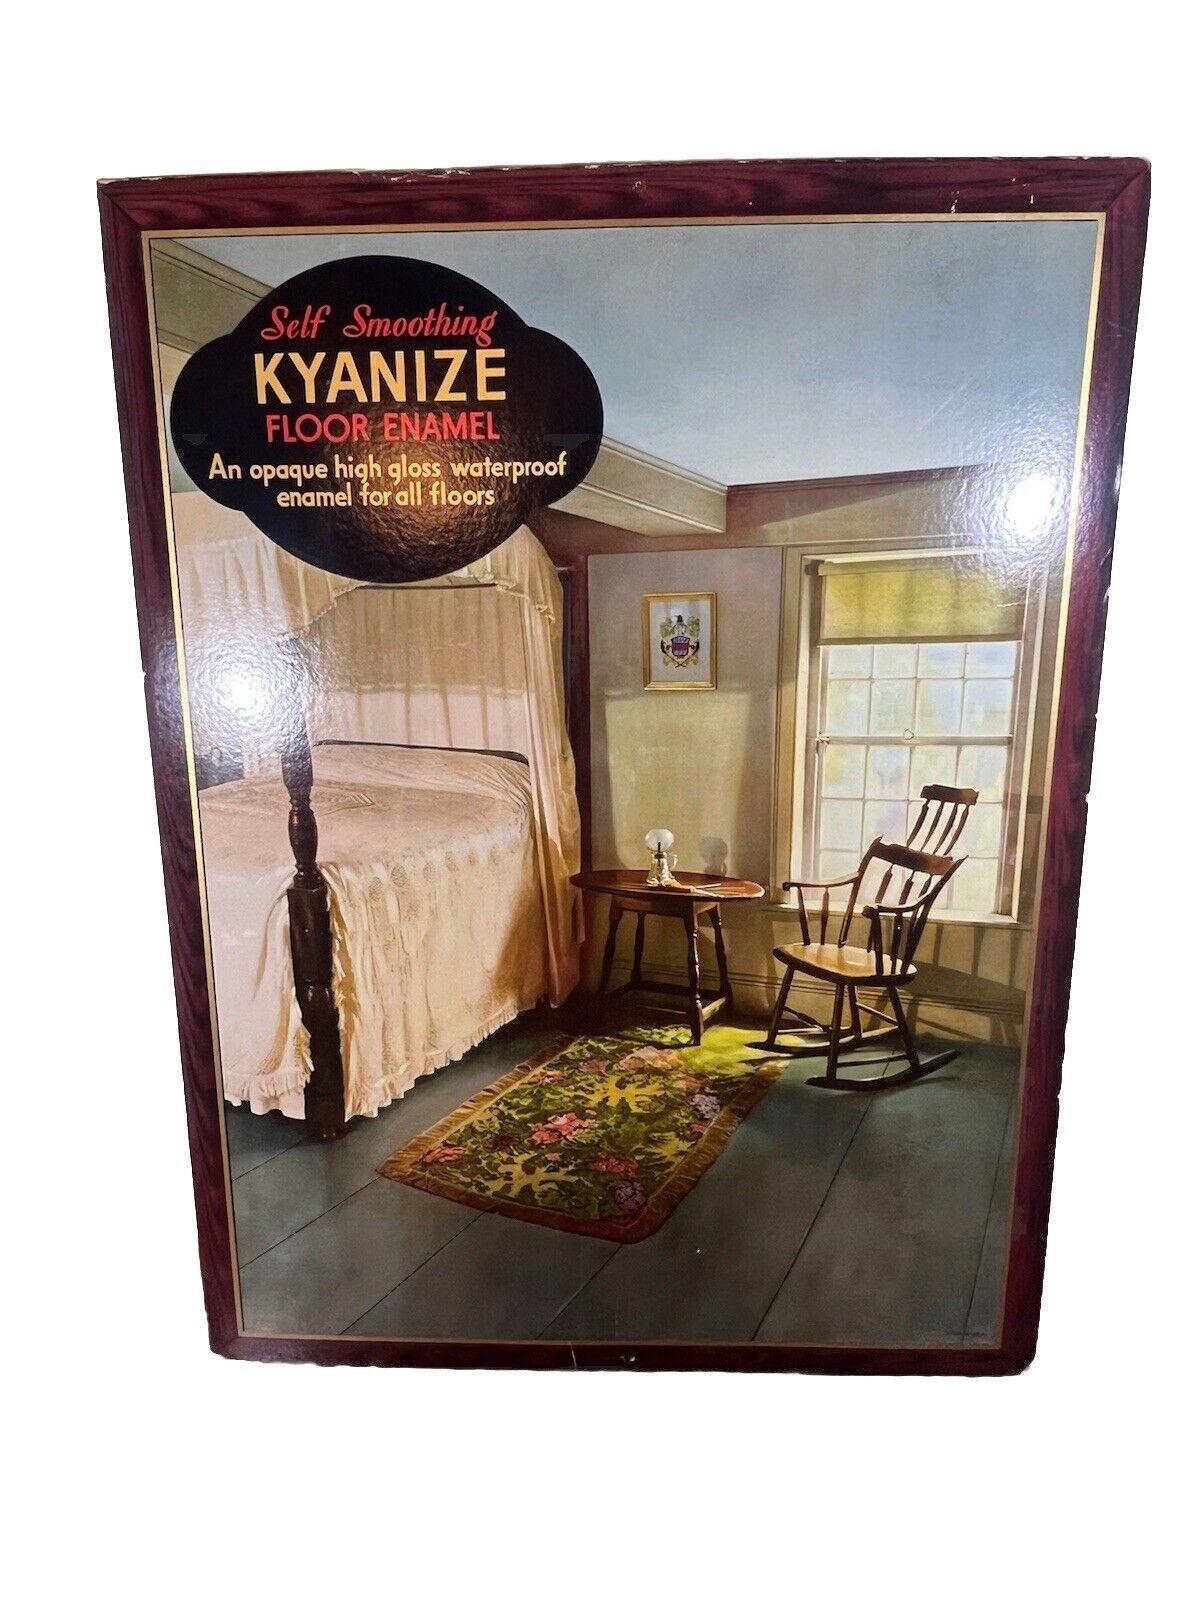 Antique Kyanize Paints Varnishes Store Counter Display Advertising Sign #2